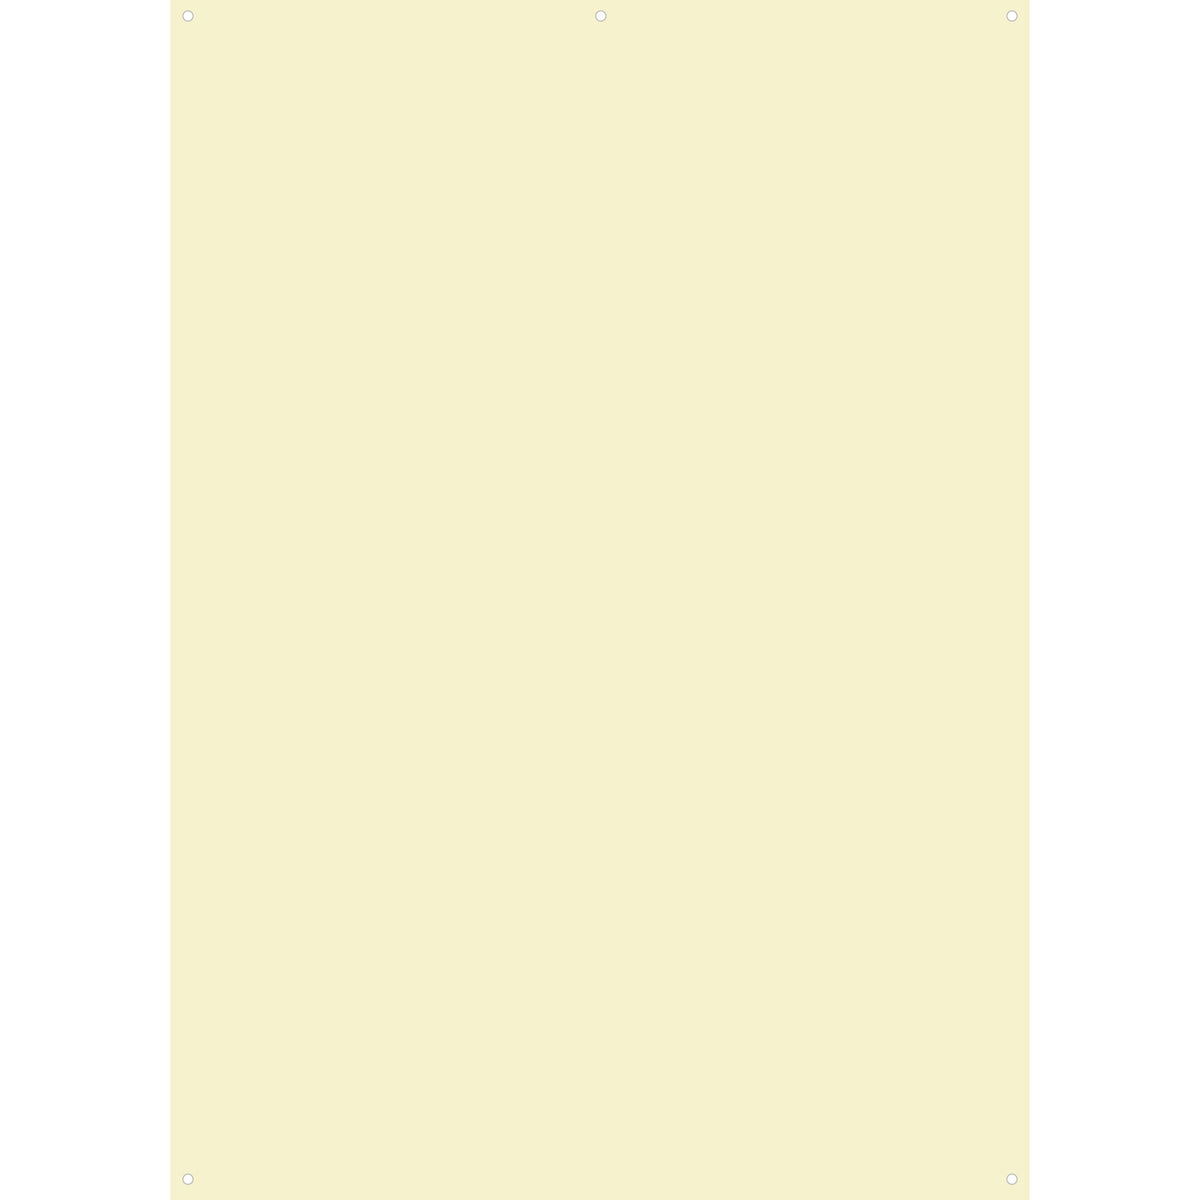 D0011-YE - X-Drop Backdrop – Light Yellow Solid Color (5' x 7') - X-Drop Backdrop – Light Yellow Solid Color (5' x 7') - D0011-YE - X-Drop Backdrop – Light Yellow Solid Color (5' x 7')